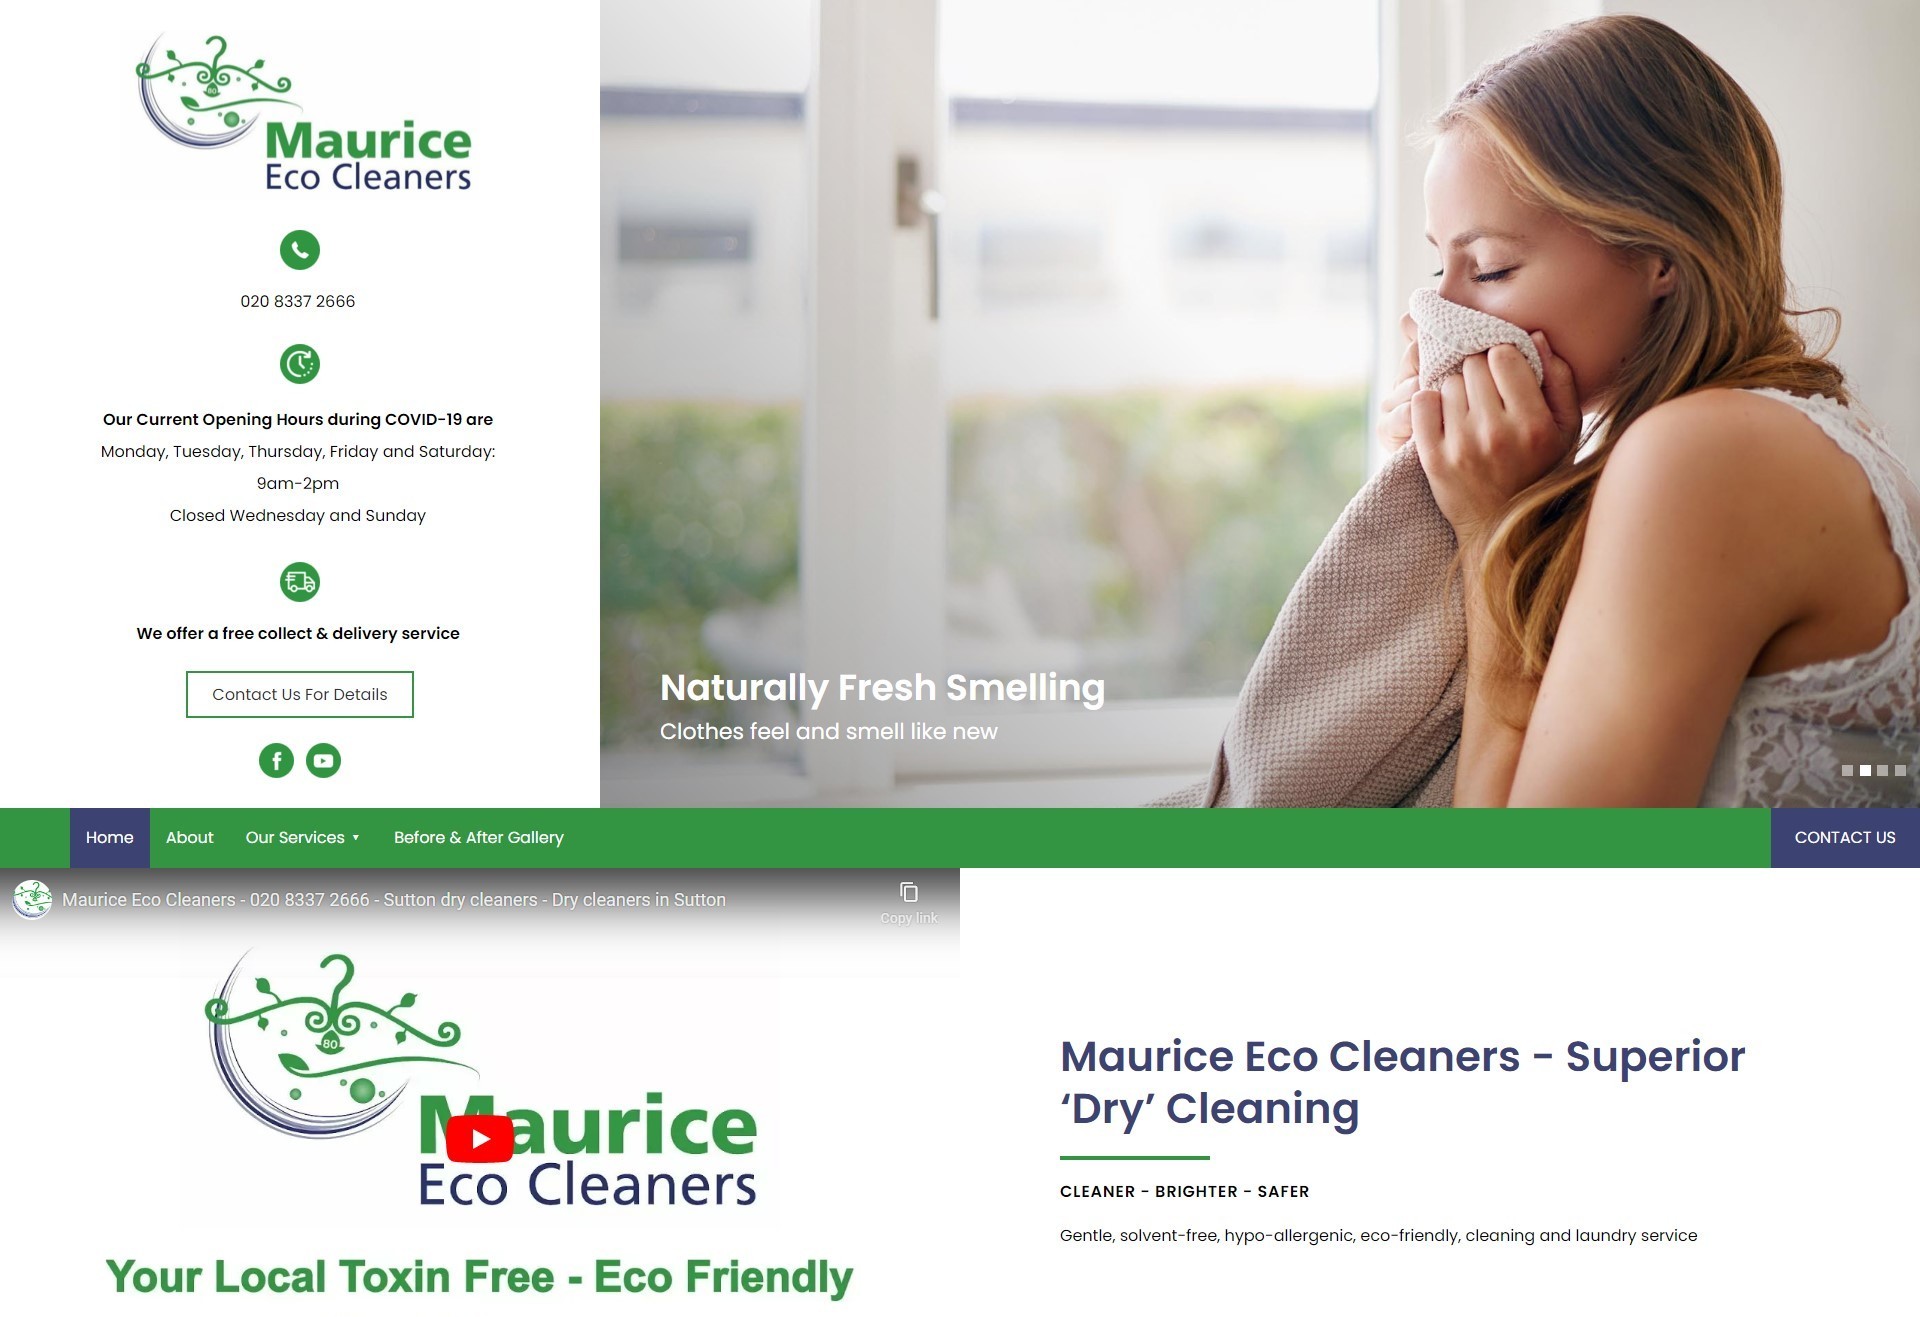 An eco cleaners website design shown on a desktop.